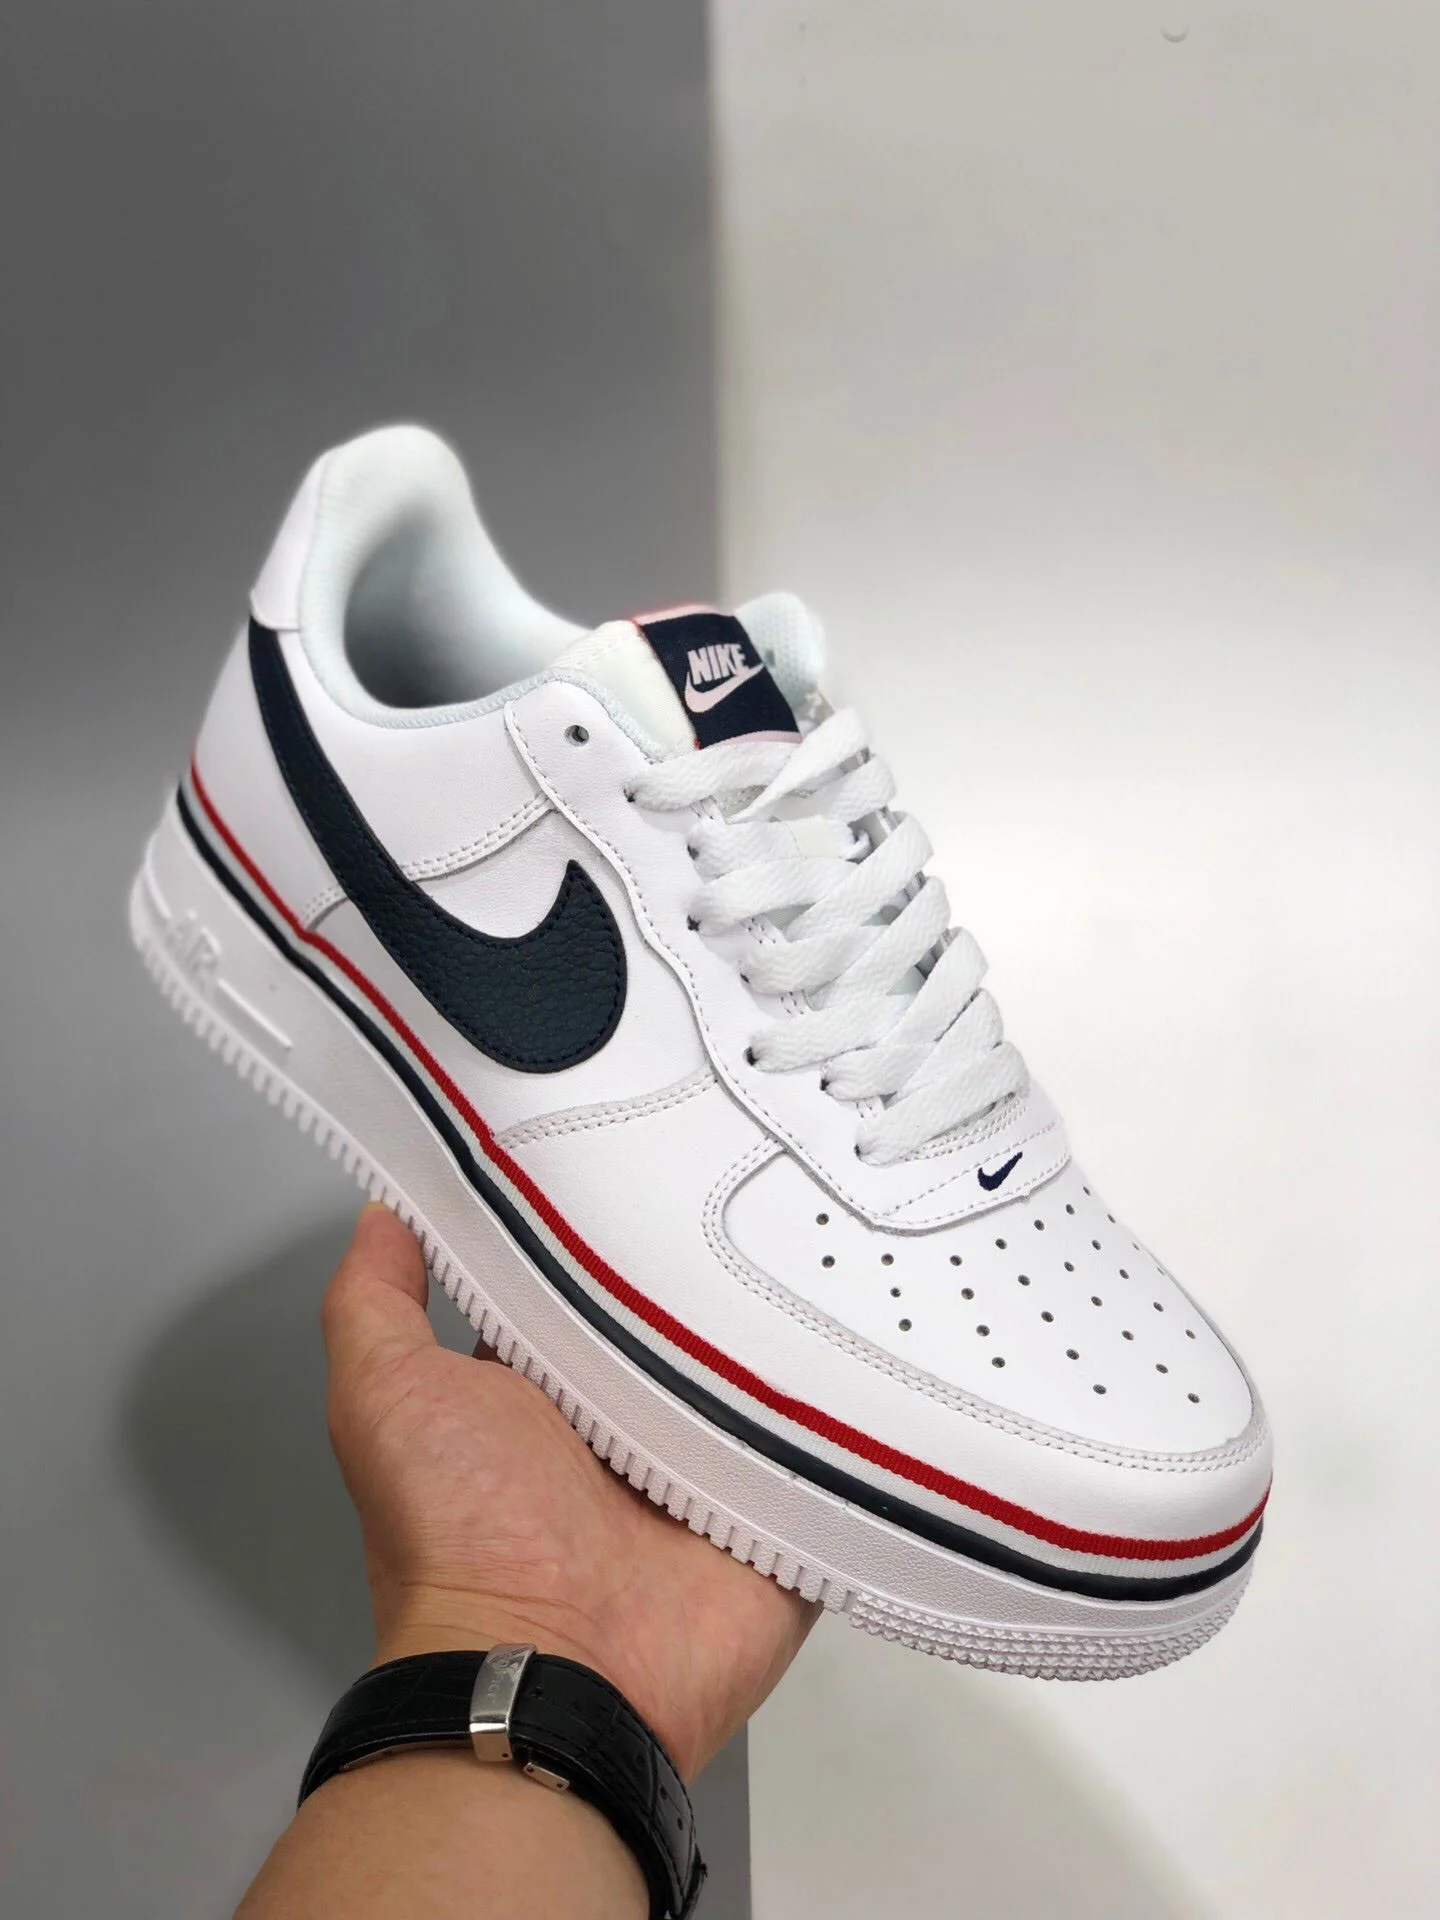 Nike Air Force 1 Low Ribbon White Black CT1621-100 For Sale